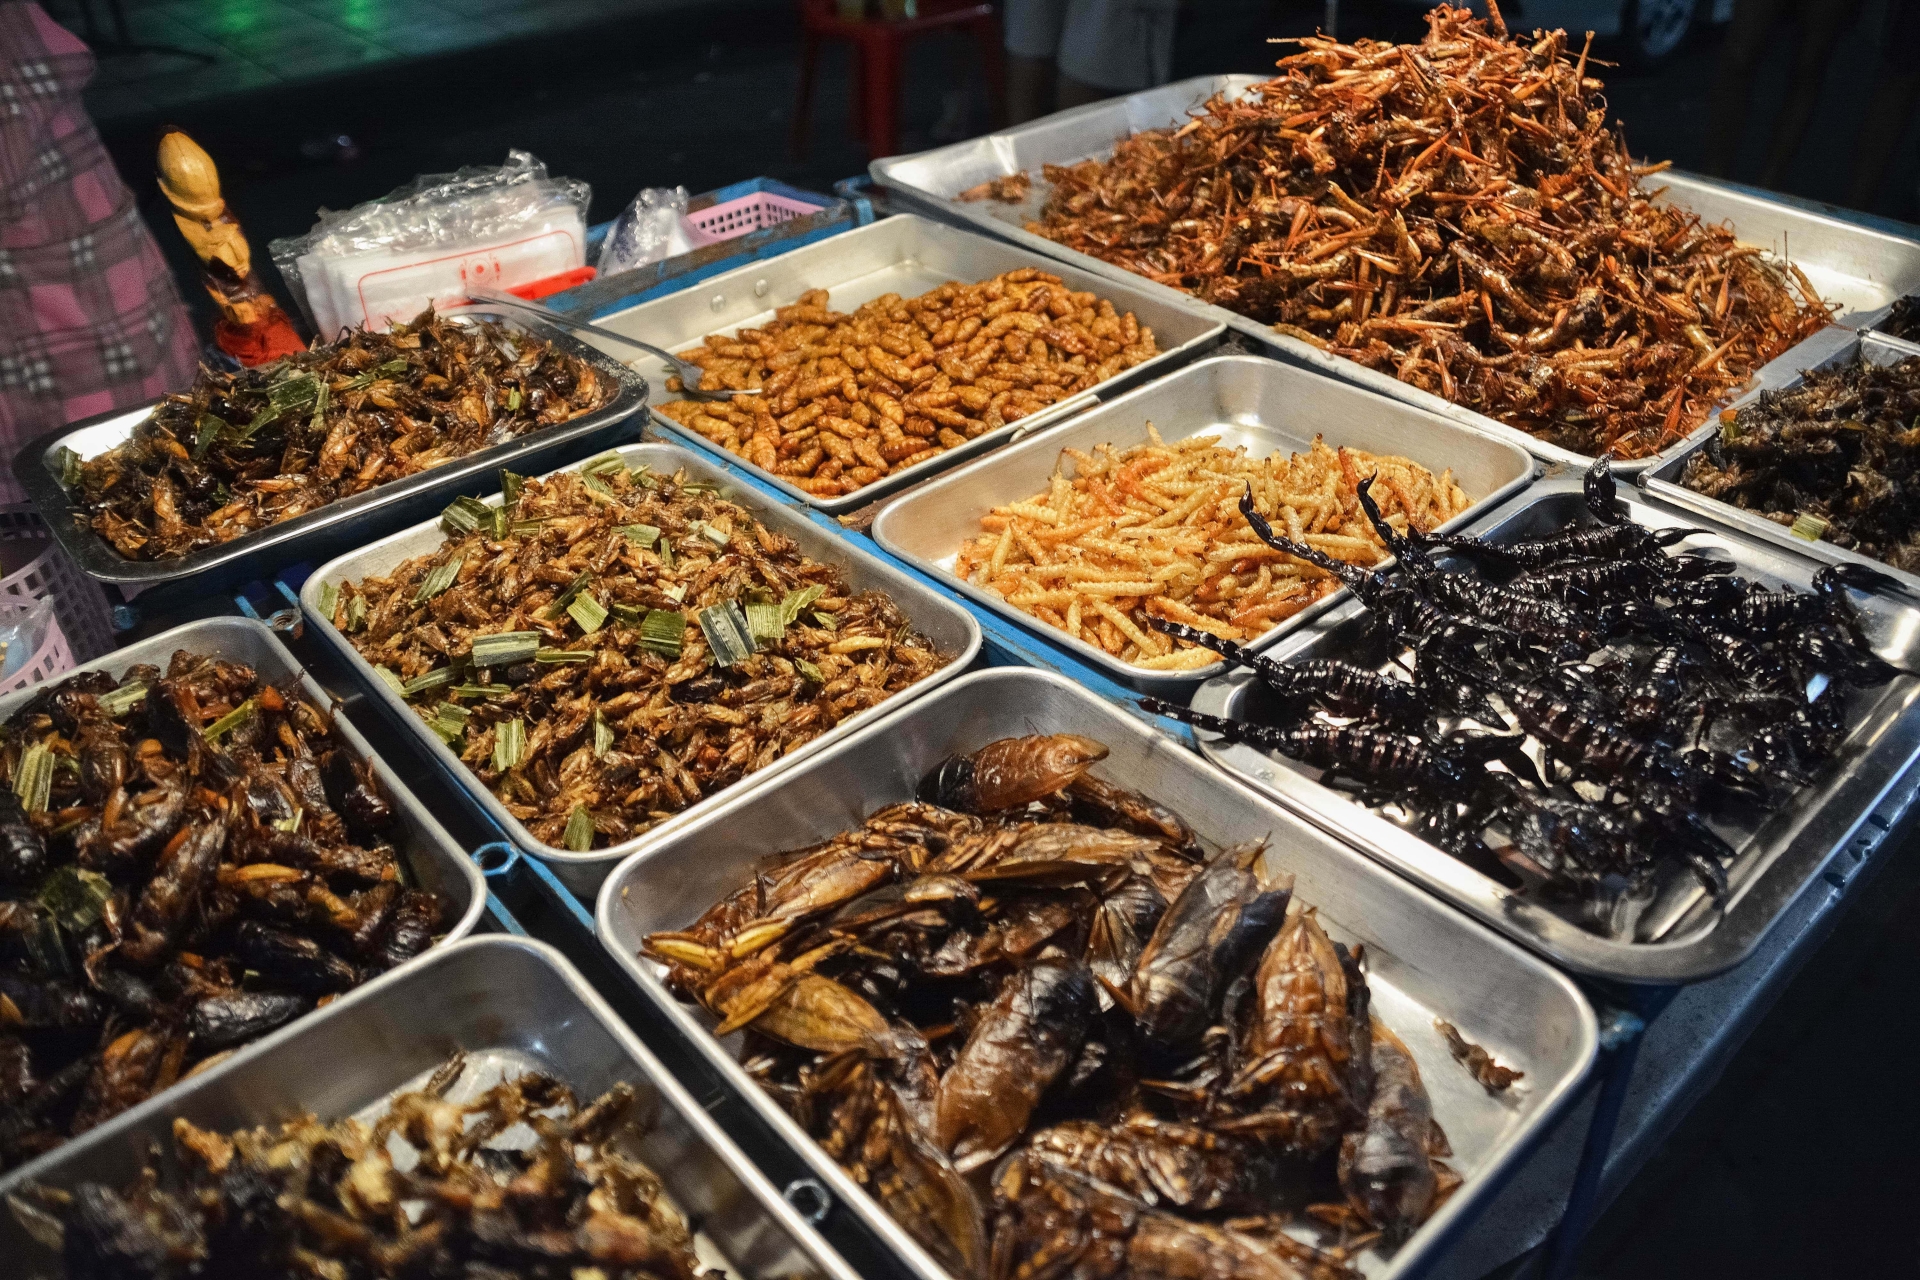 Ento Food: Insects as food